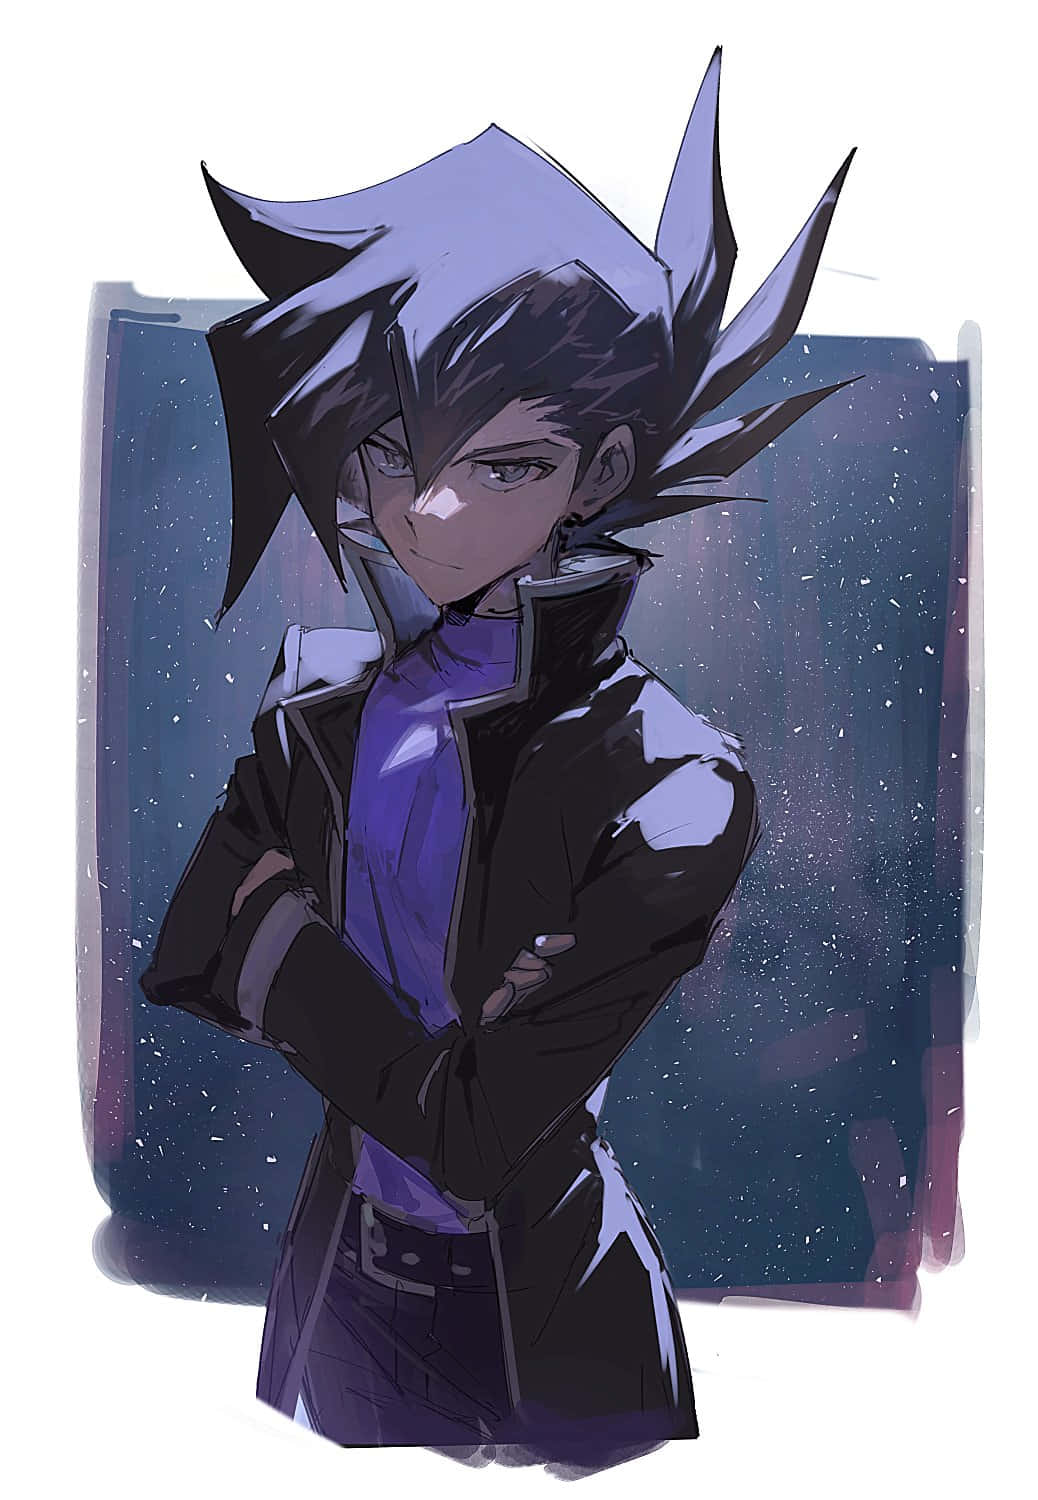 Caption: Chazz Princeton Smirking with a Duel Disk Wallpaper